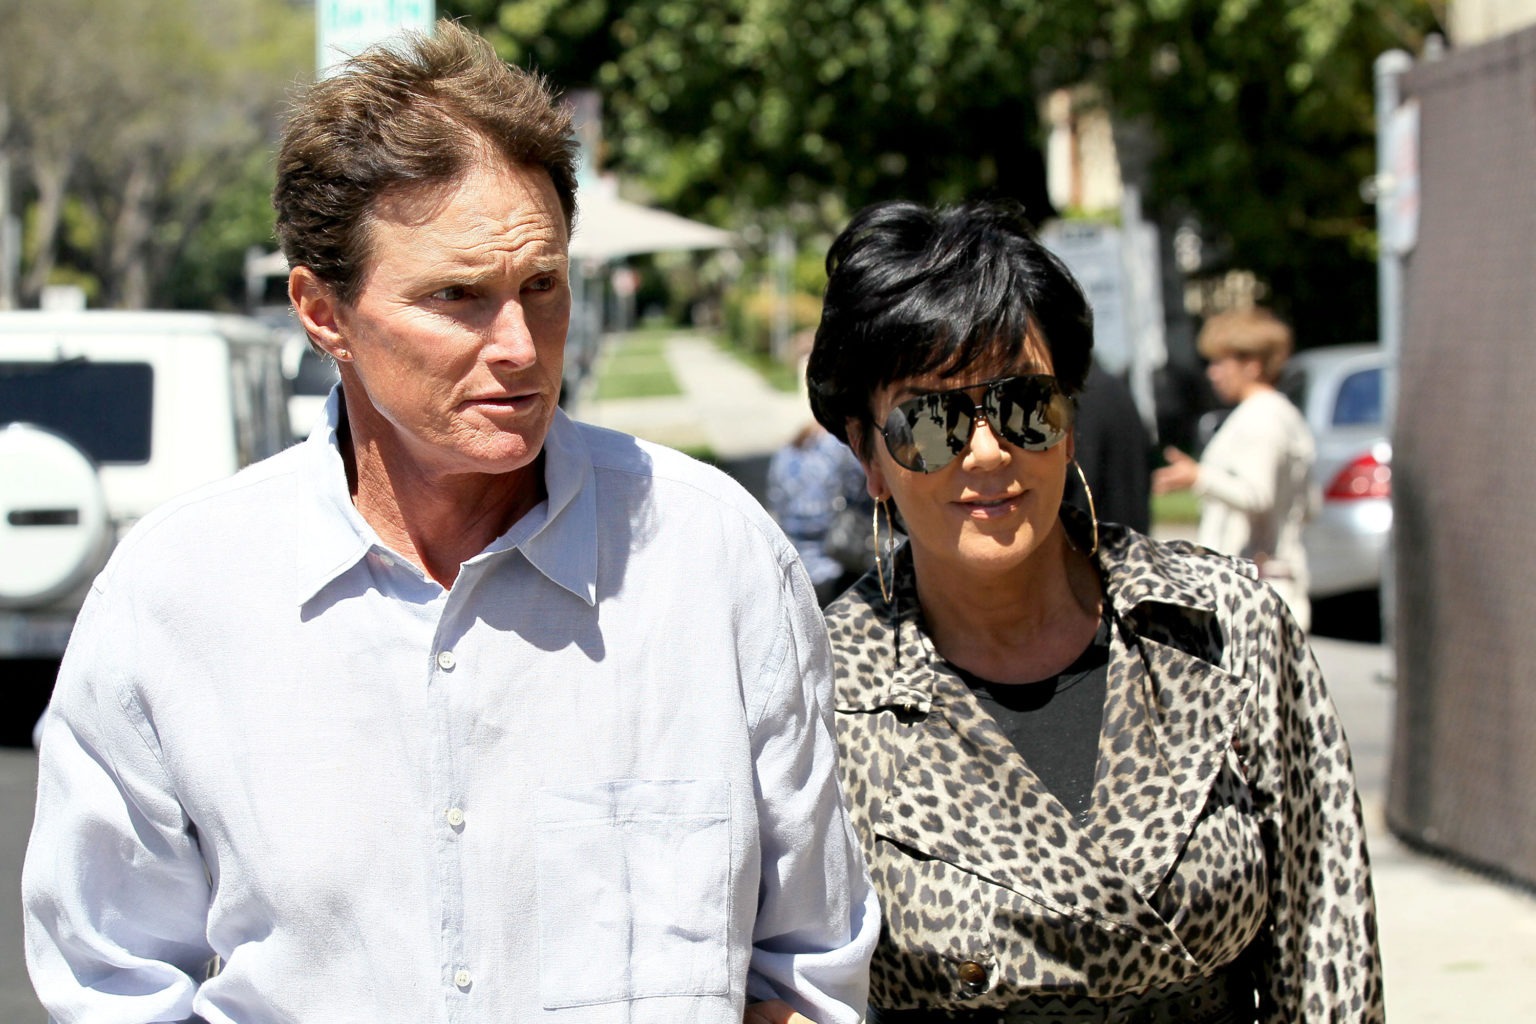 Caitlyn Jenner Risks Another Feud With The Kardashians By Taking Part In Explosive Docuseries